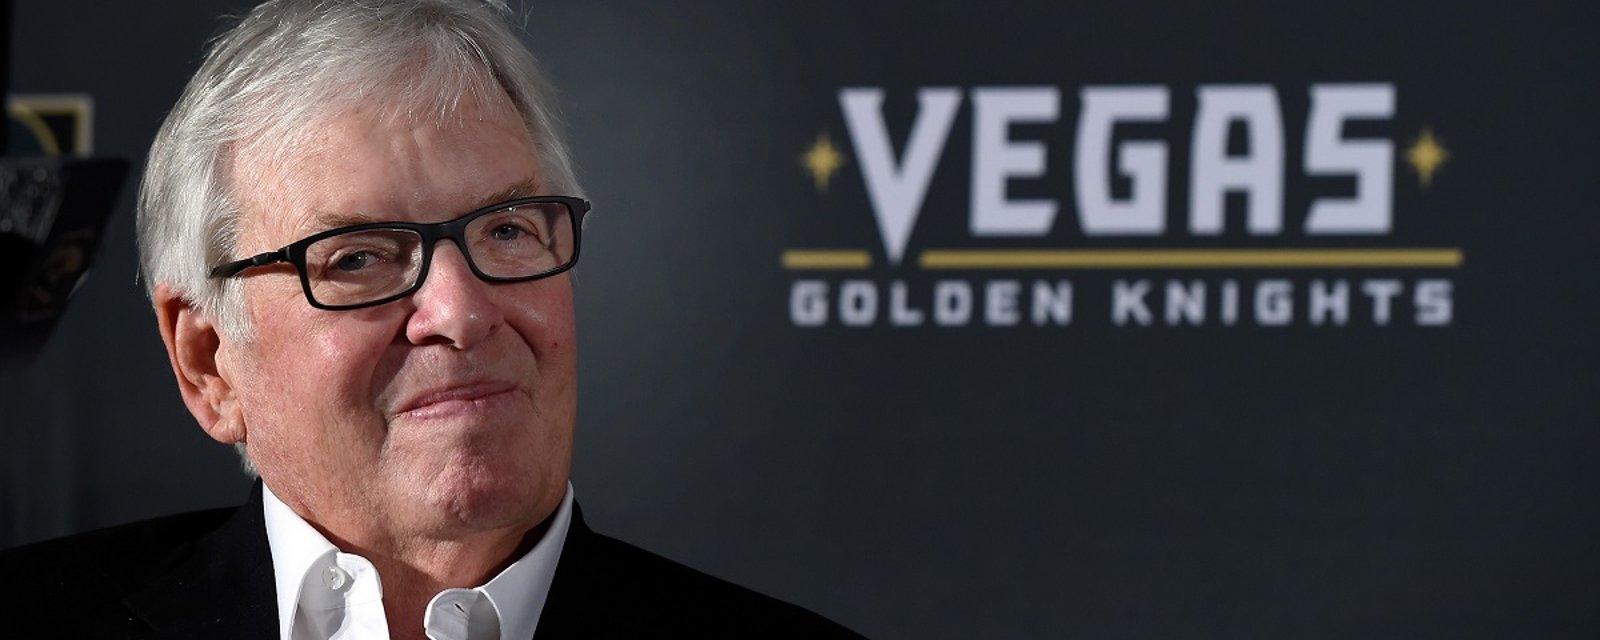 Golden Knights owner Bill Foley hints at a secret weapon for the playoffs.